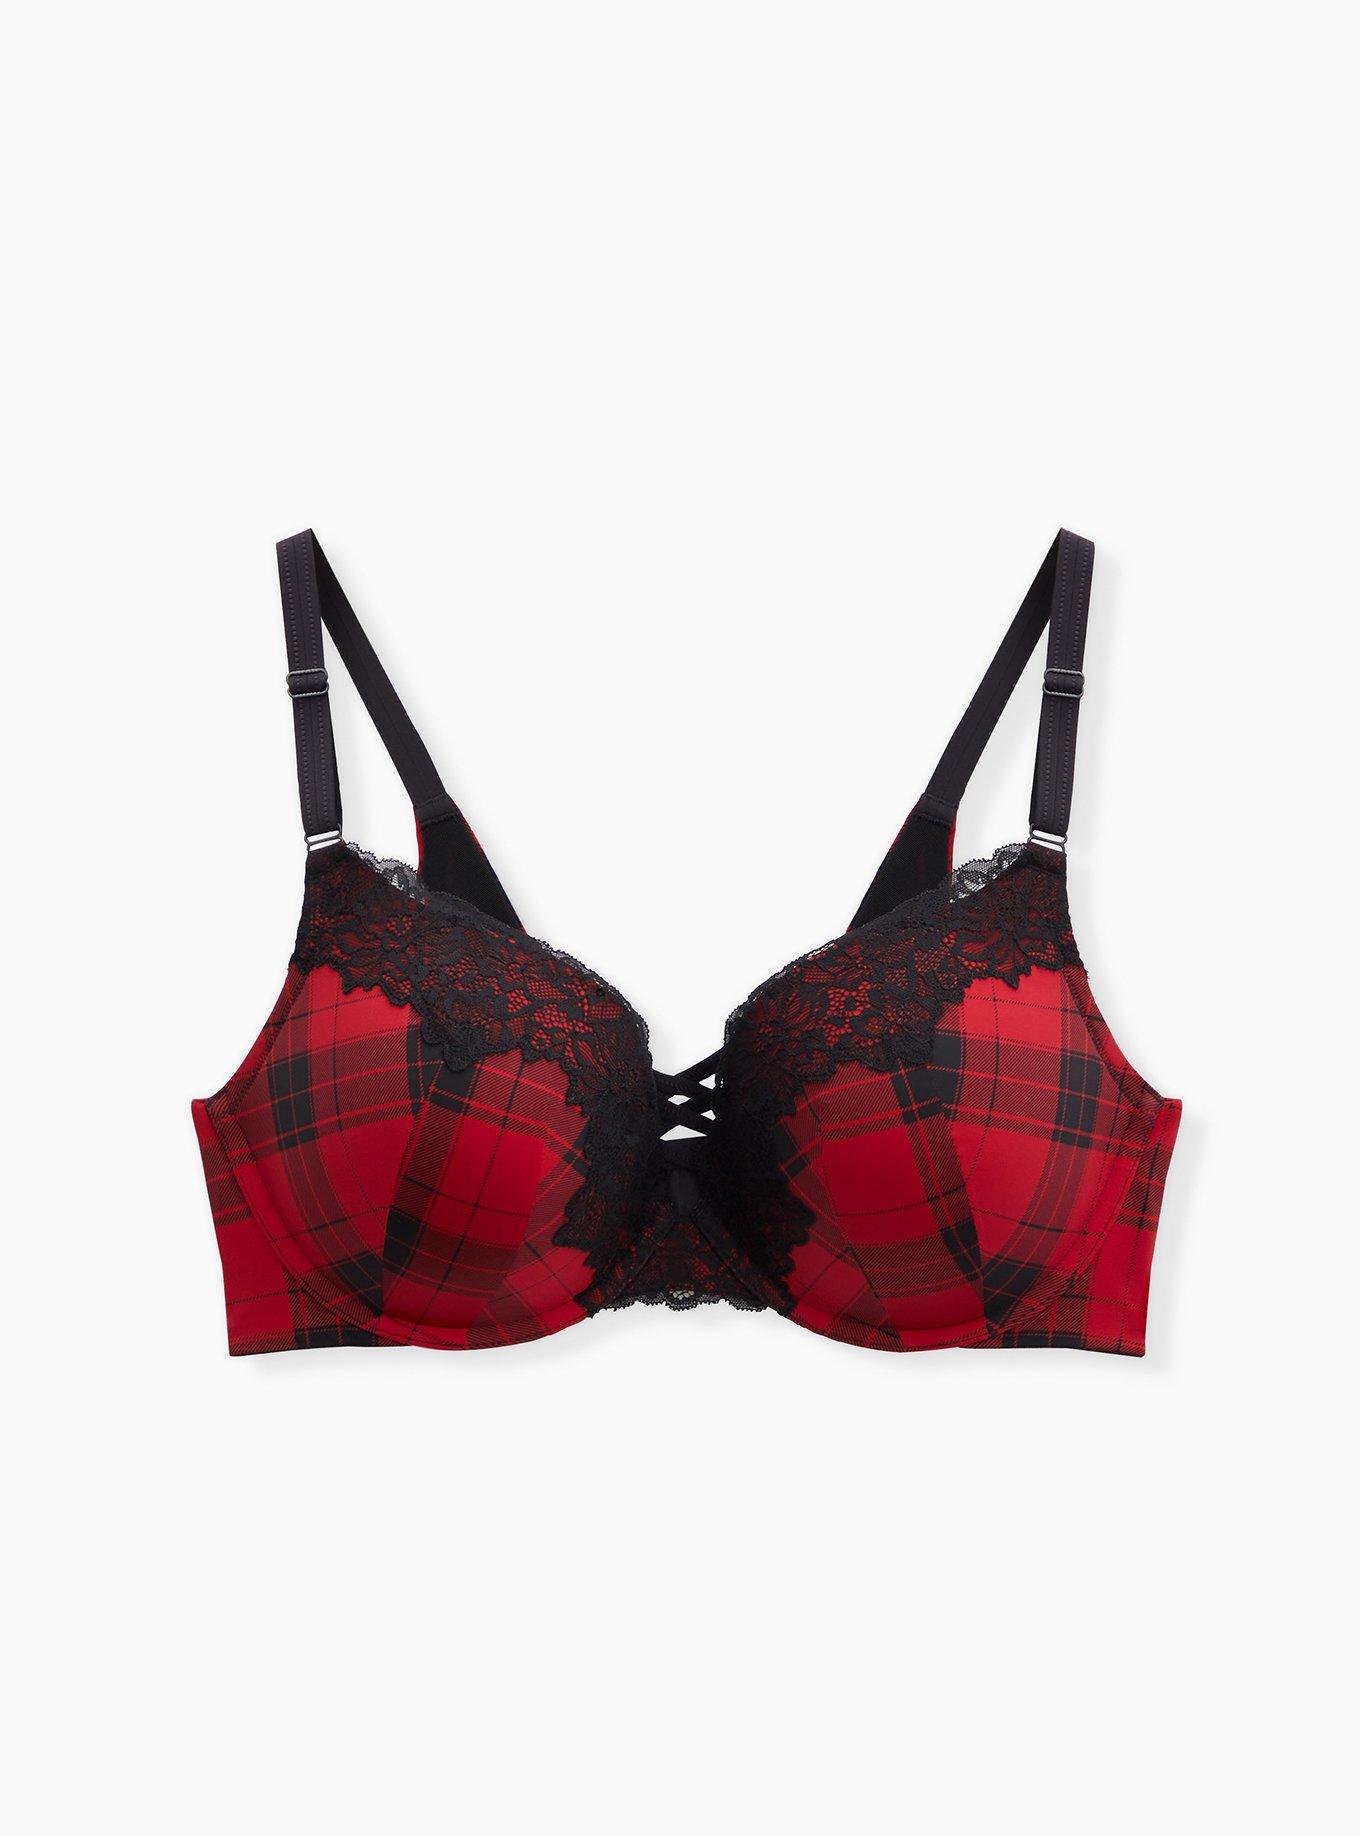 Torrid - Take the PLUNGE with the XO Plunge Push Up Bra